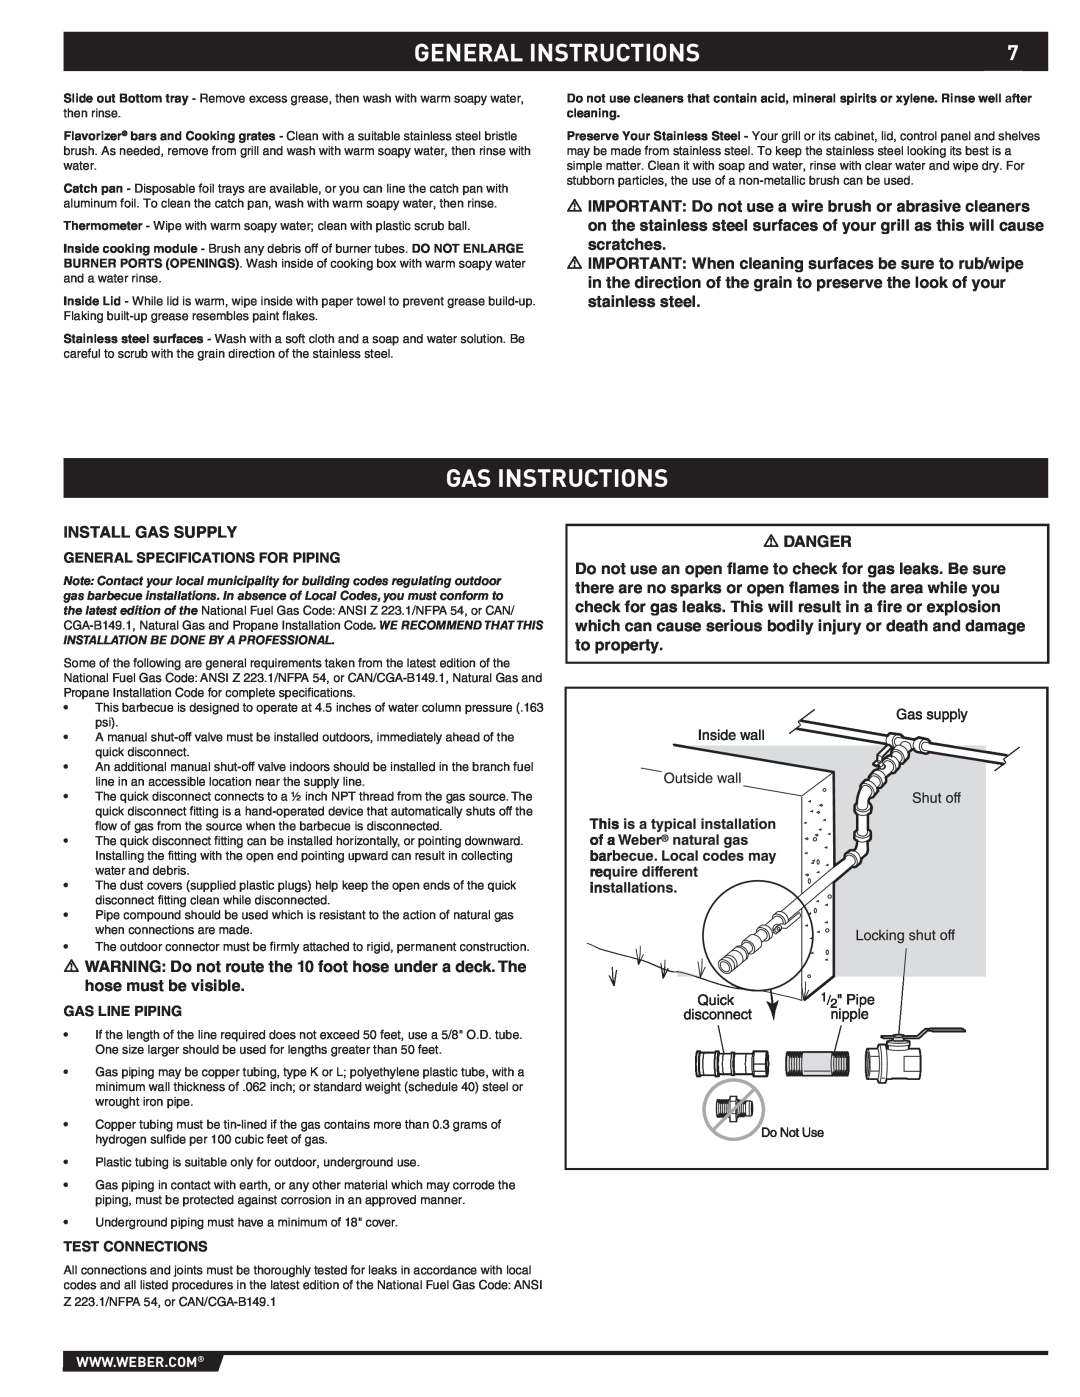 Weber S-470TM Gas Instructions, General Instructions, General Specifications For Piping, Gas Line Piping, Test Connections 